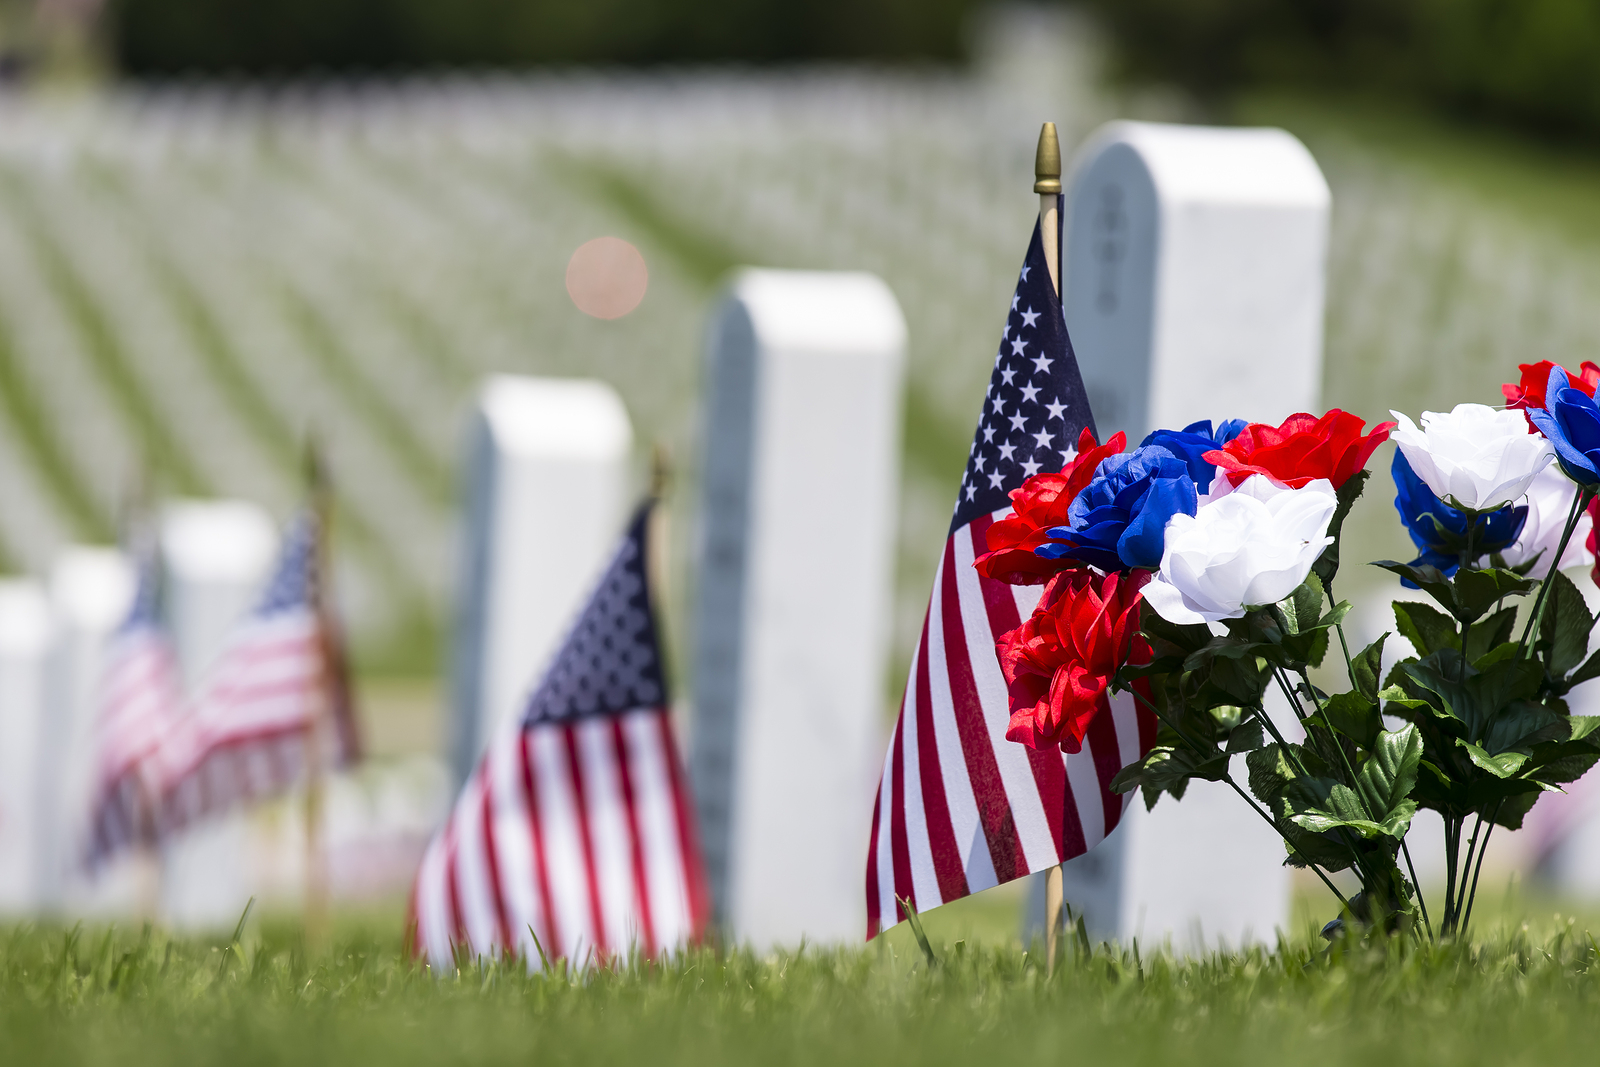 Cape Canaveral Veterans Cemetery: A Comfort to Military Families